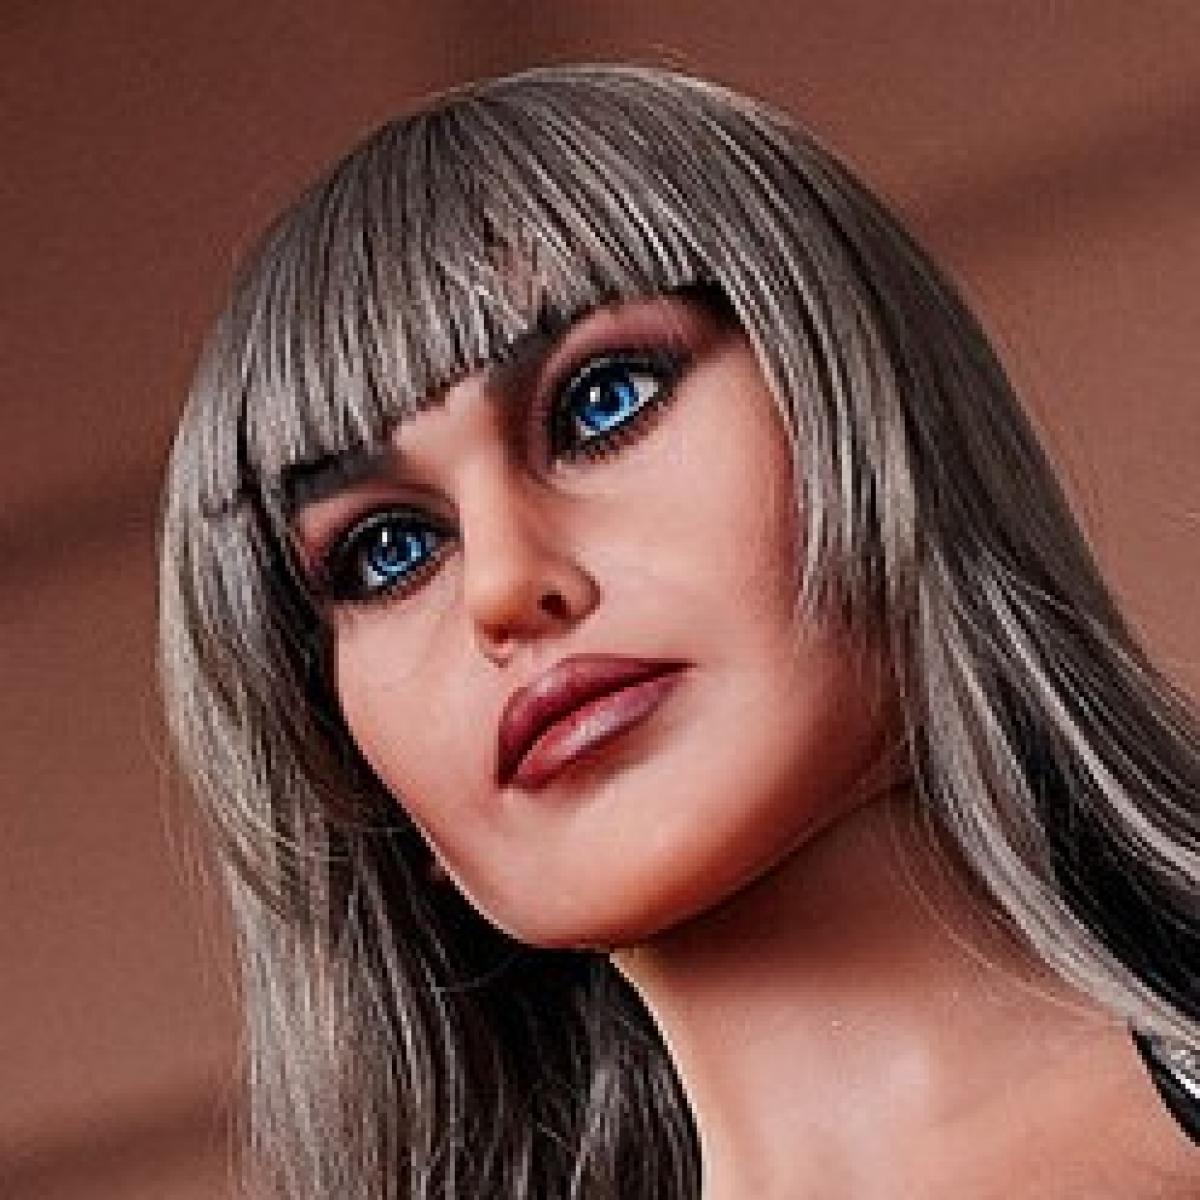 Neodoll Racy Monica - Sex Doll Head - M16 Compatible - Brown